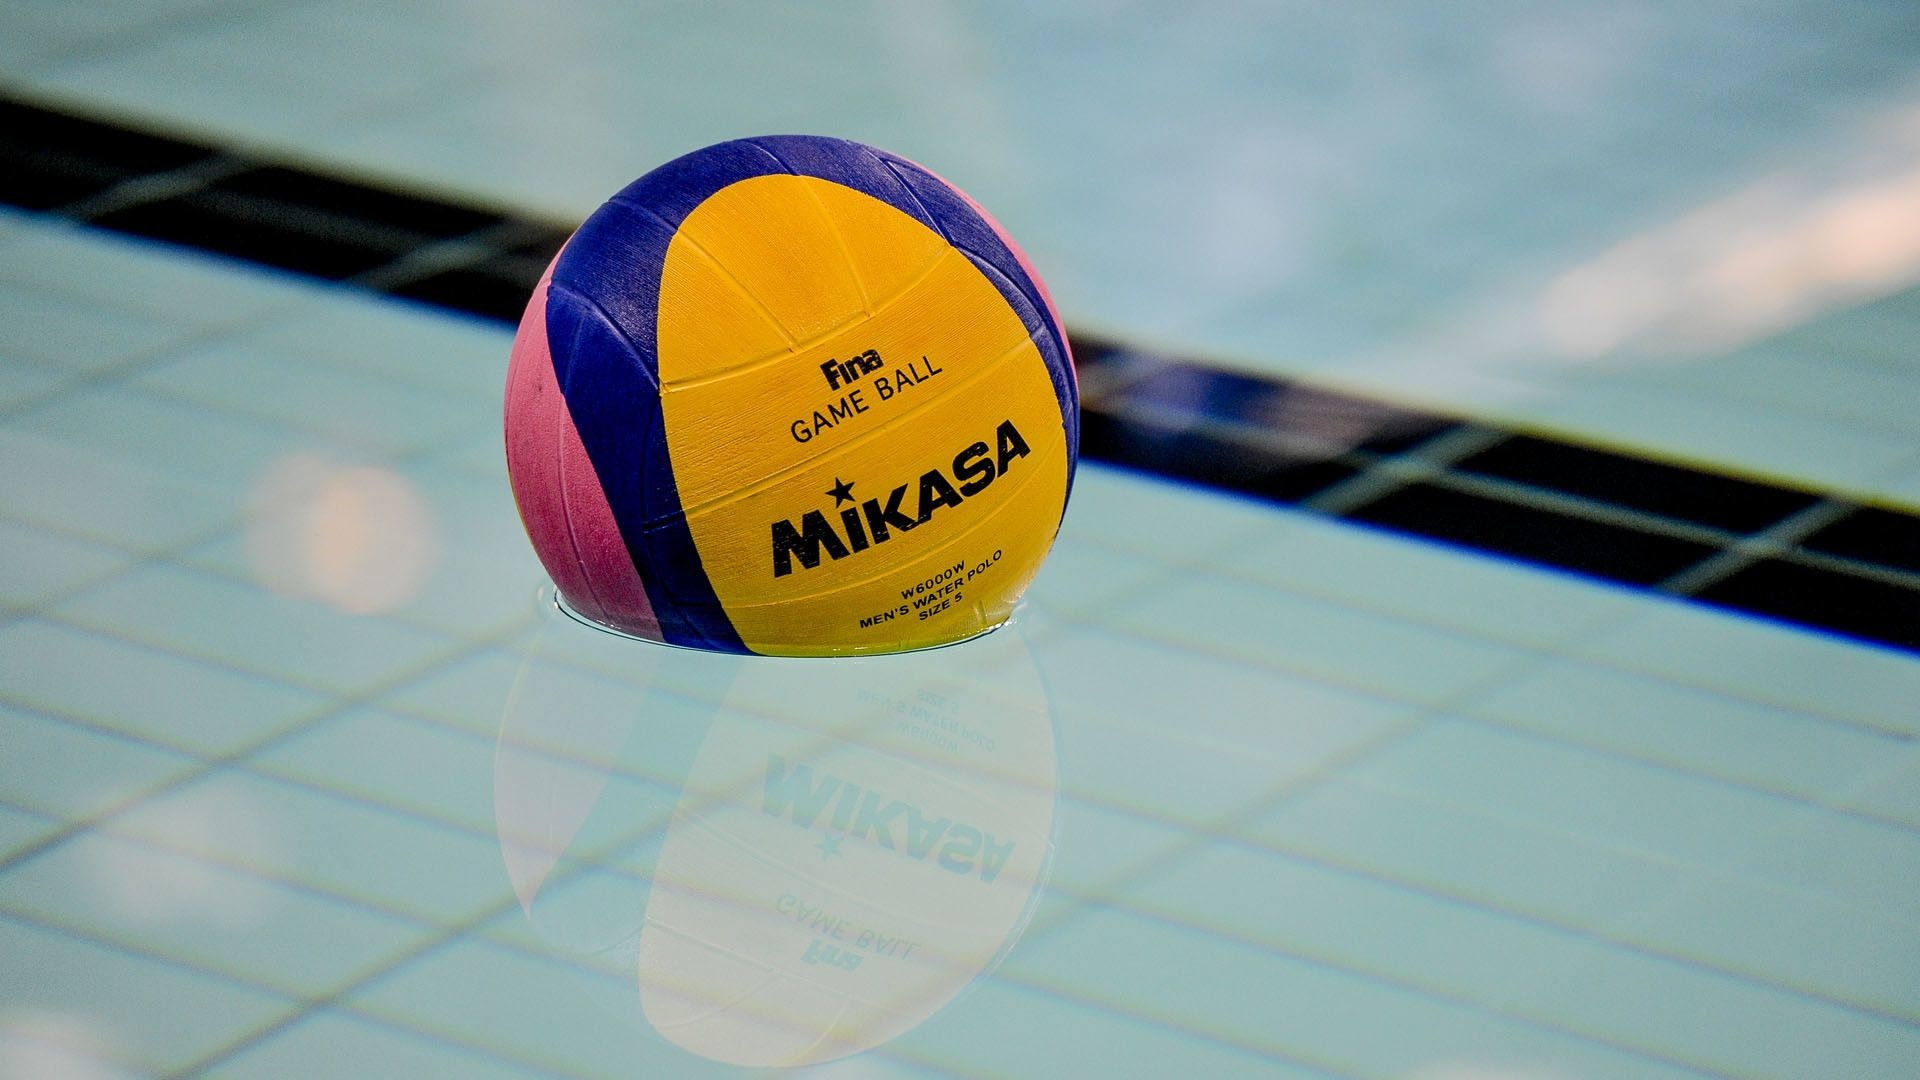 Water Polo: A standard swim sports disciplines ball approved by the International Swimming Federation. 1920x1080 Full HD Background.